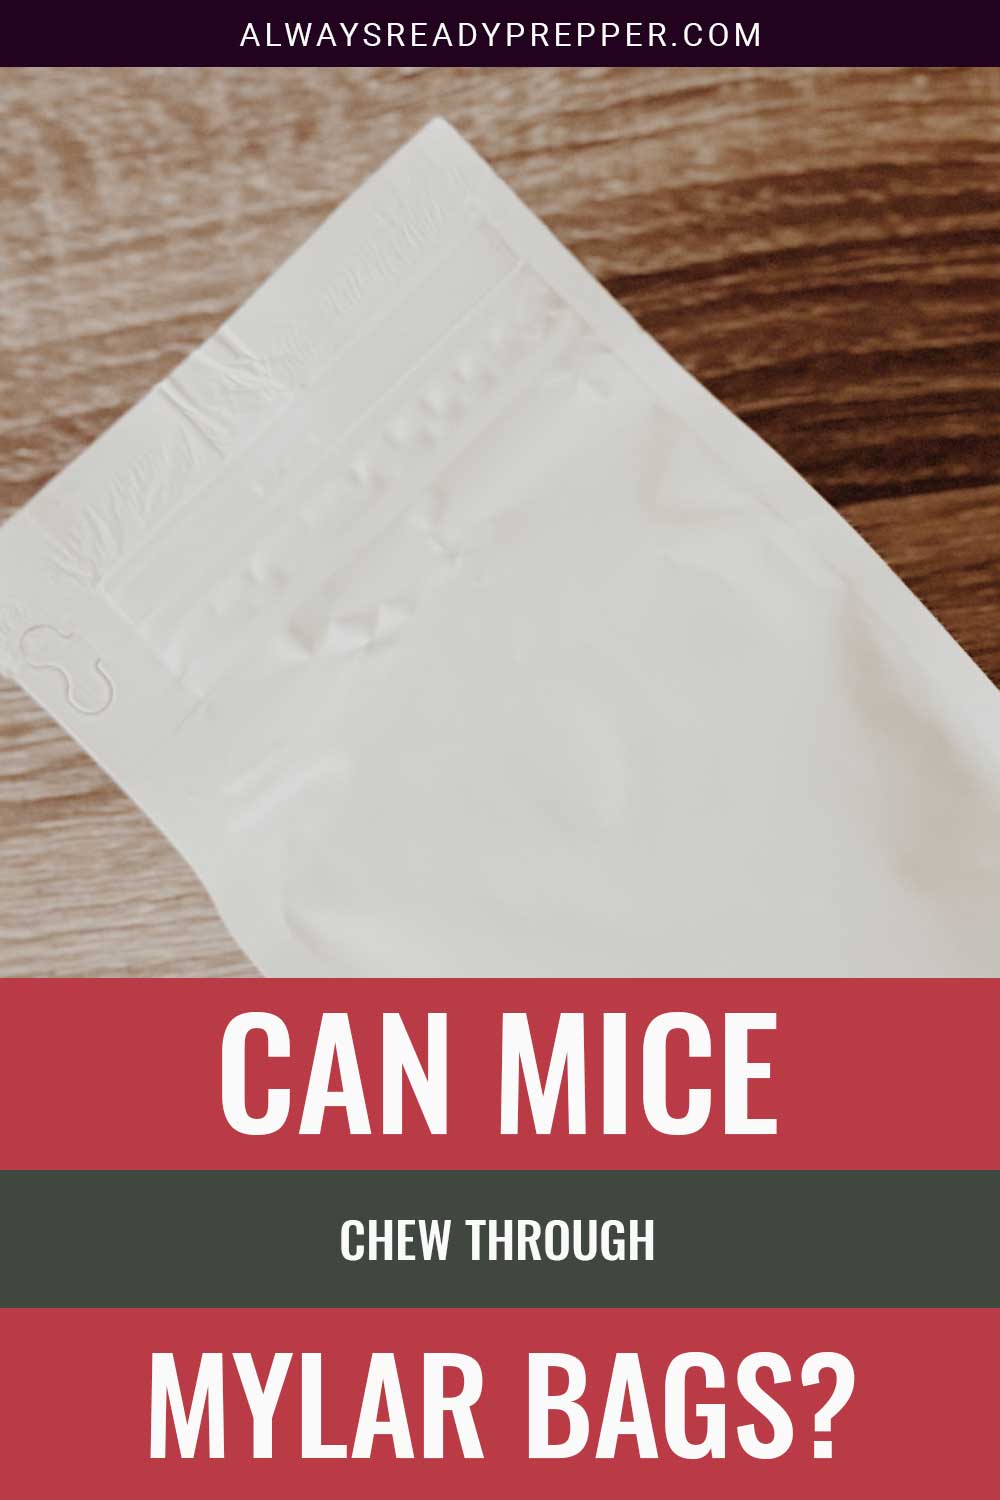 A white mylar bag on a wooden surface - Can Mice Chew Through it?